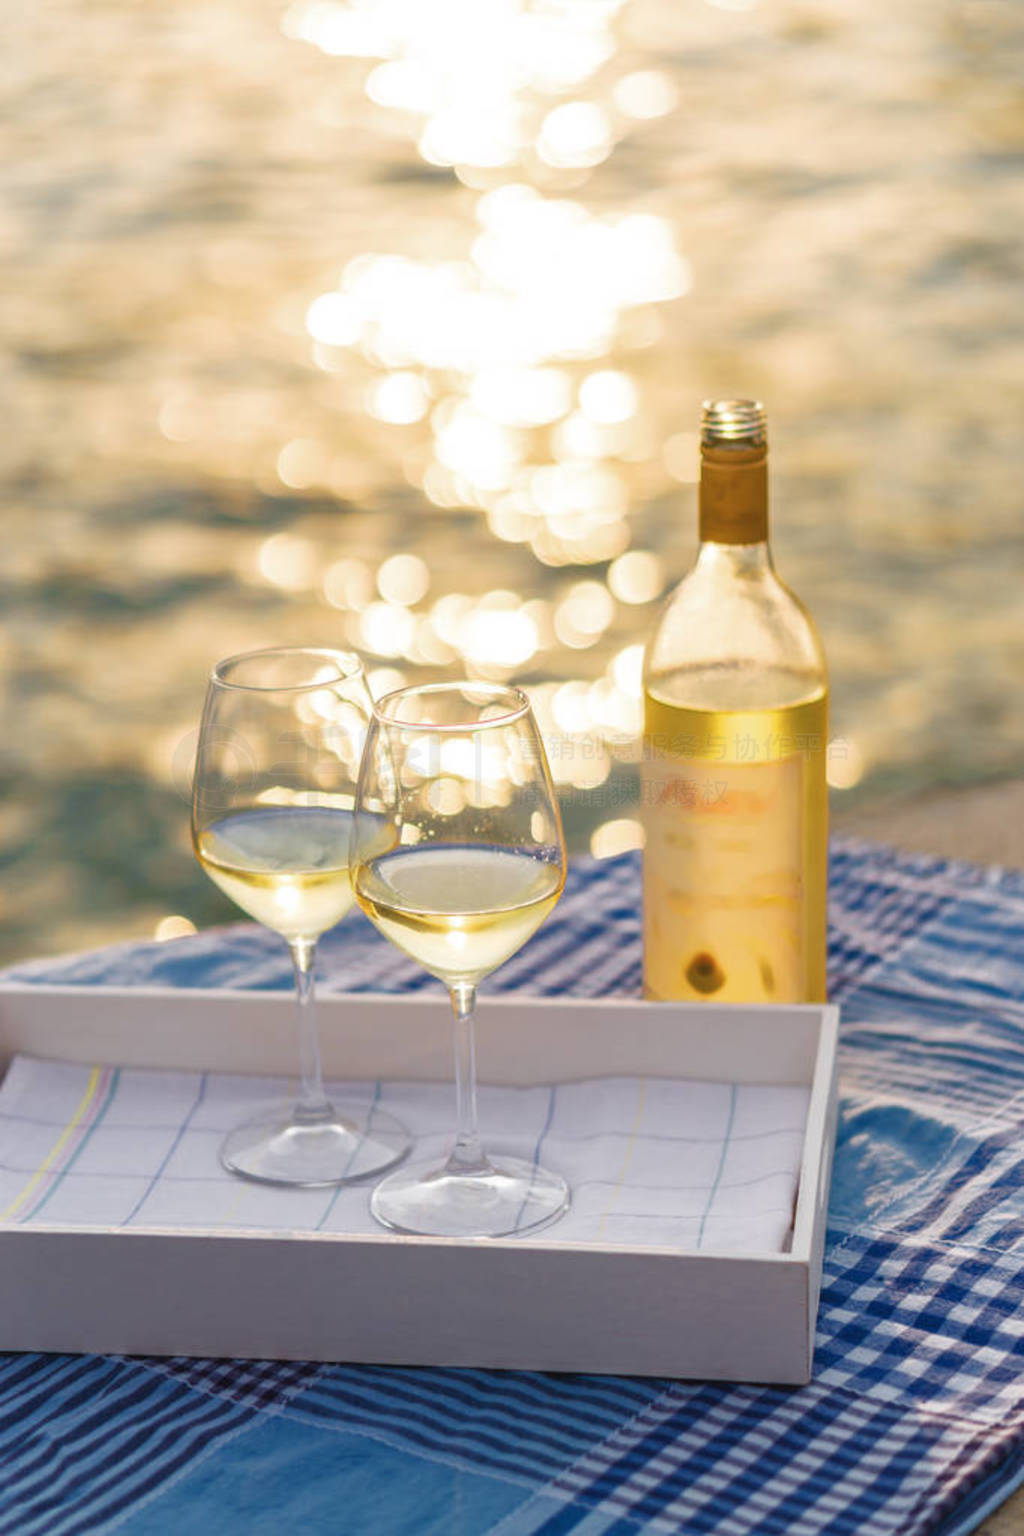 Sunset view of two wine glasses and bottle of white wine on the